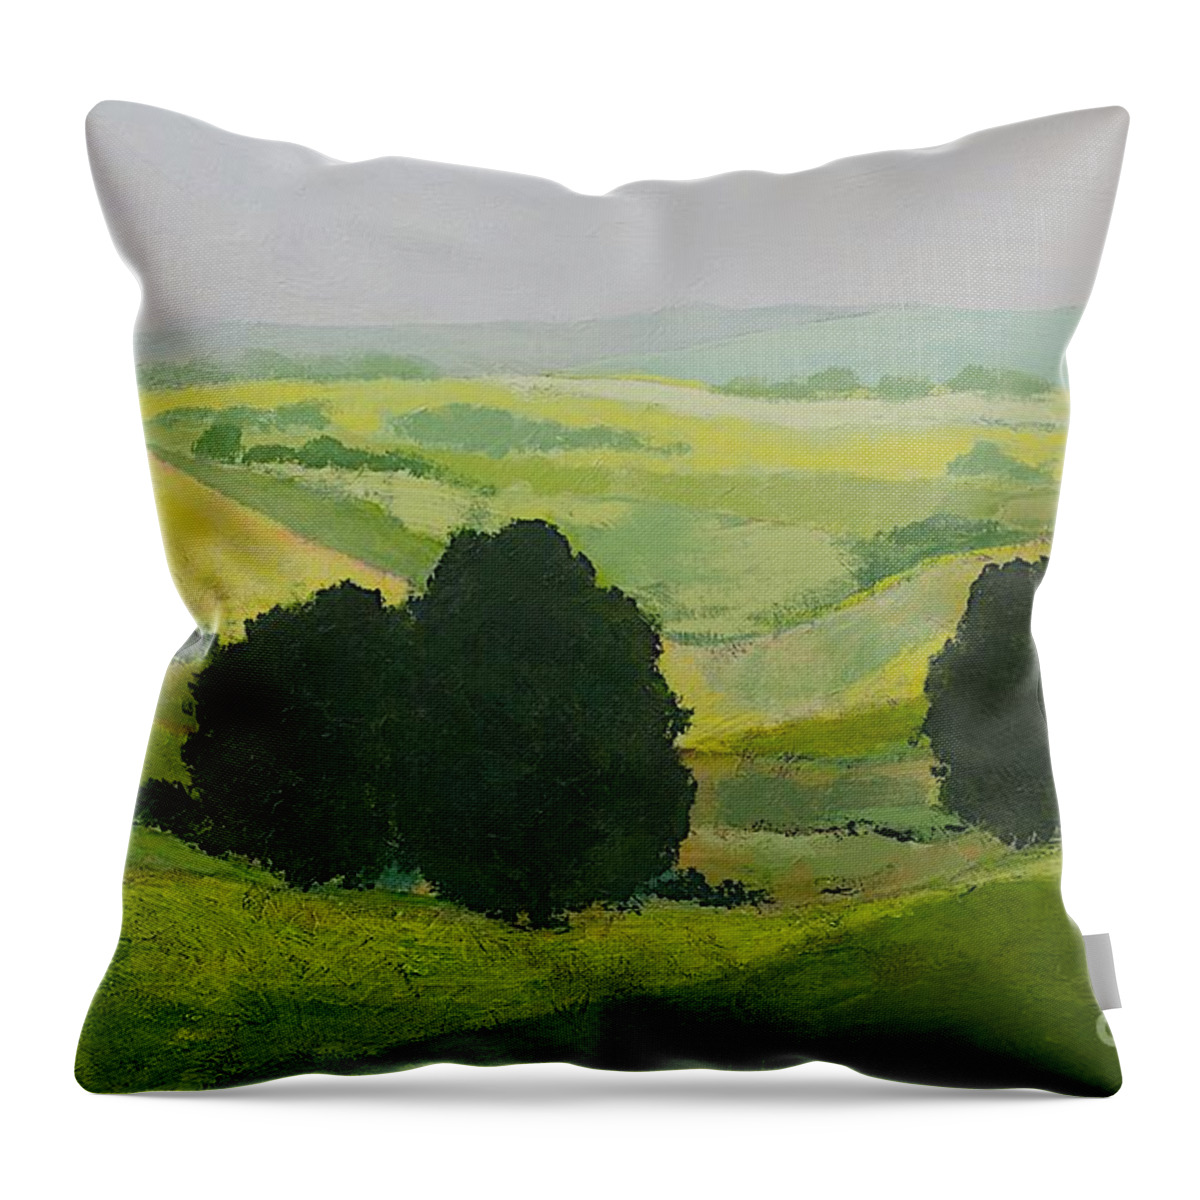 Landscape Throw Pillow featuring the painting It Grows on Trees by Allan P Friedlander